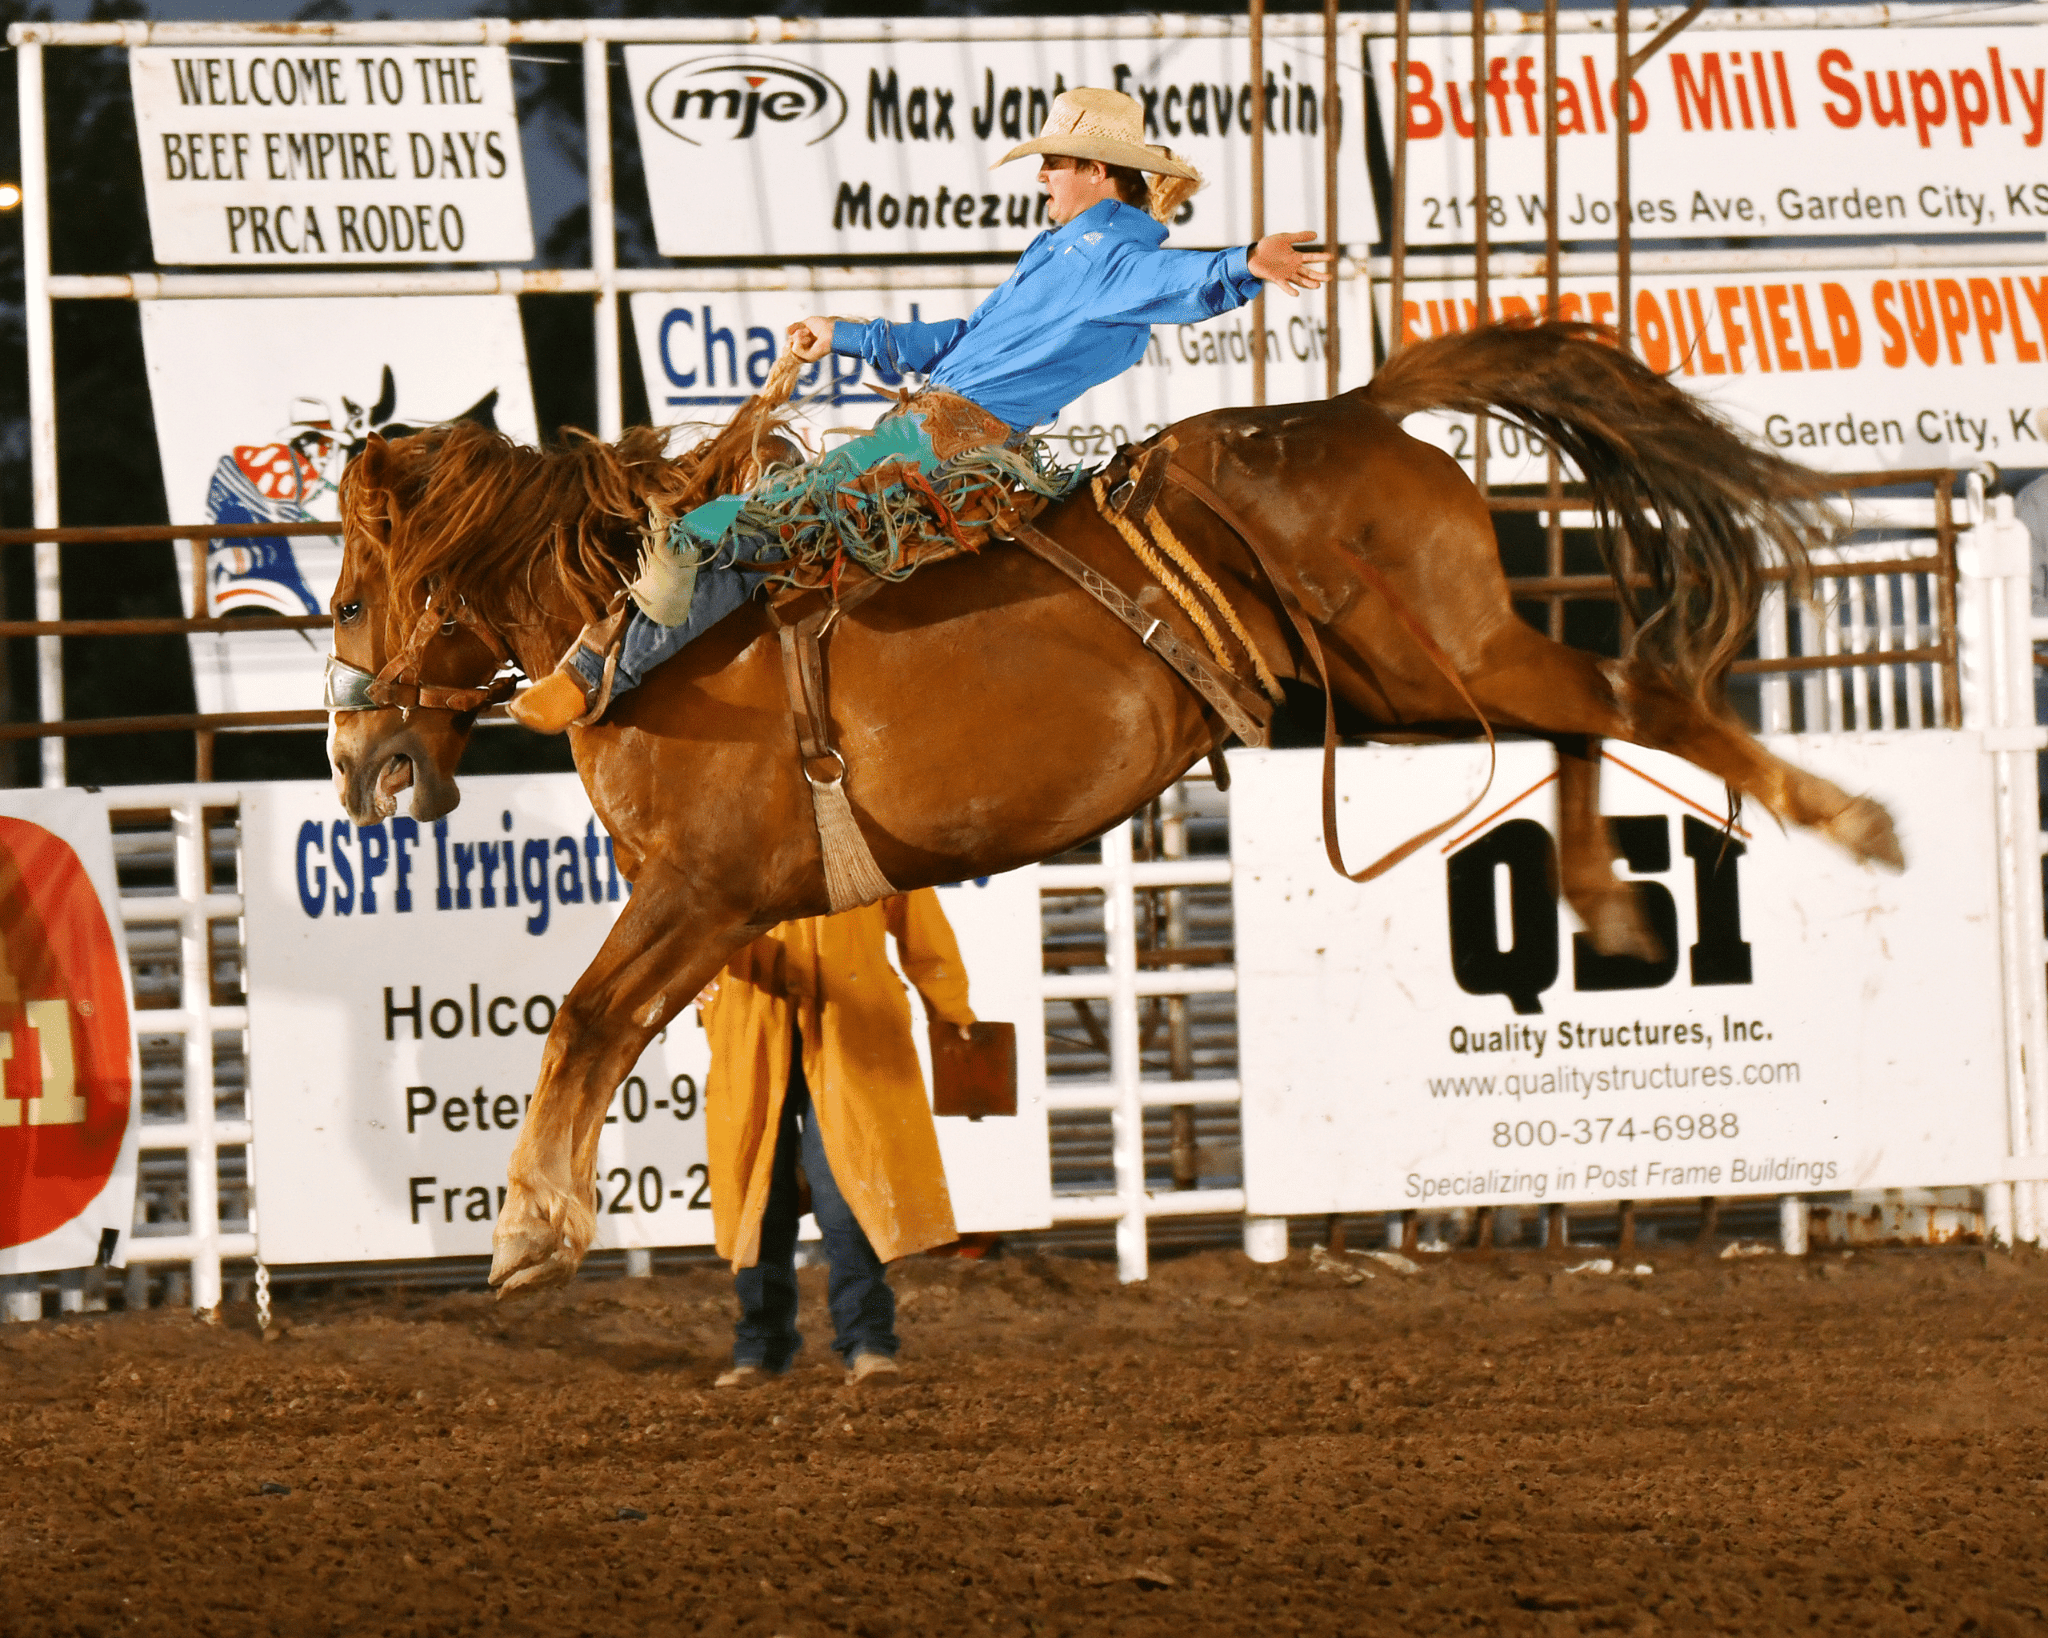 Garden City Rodeo Guide – Part 3: Rough Stock Events